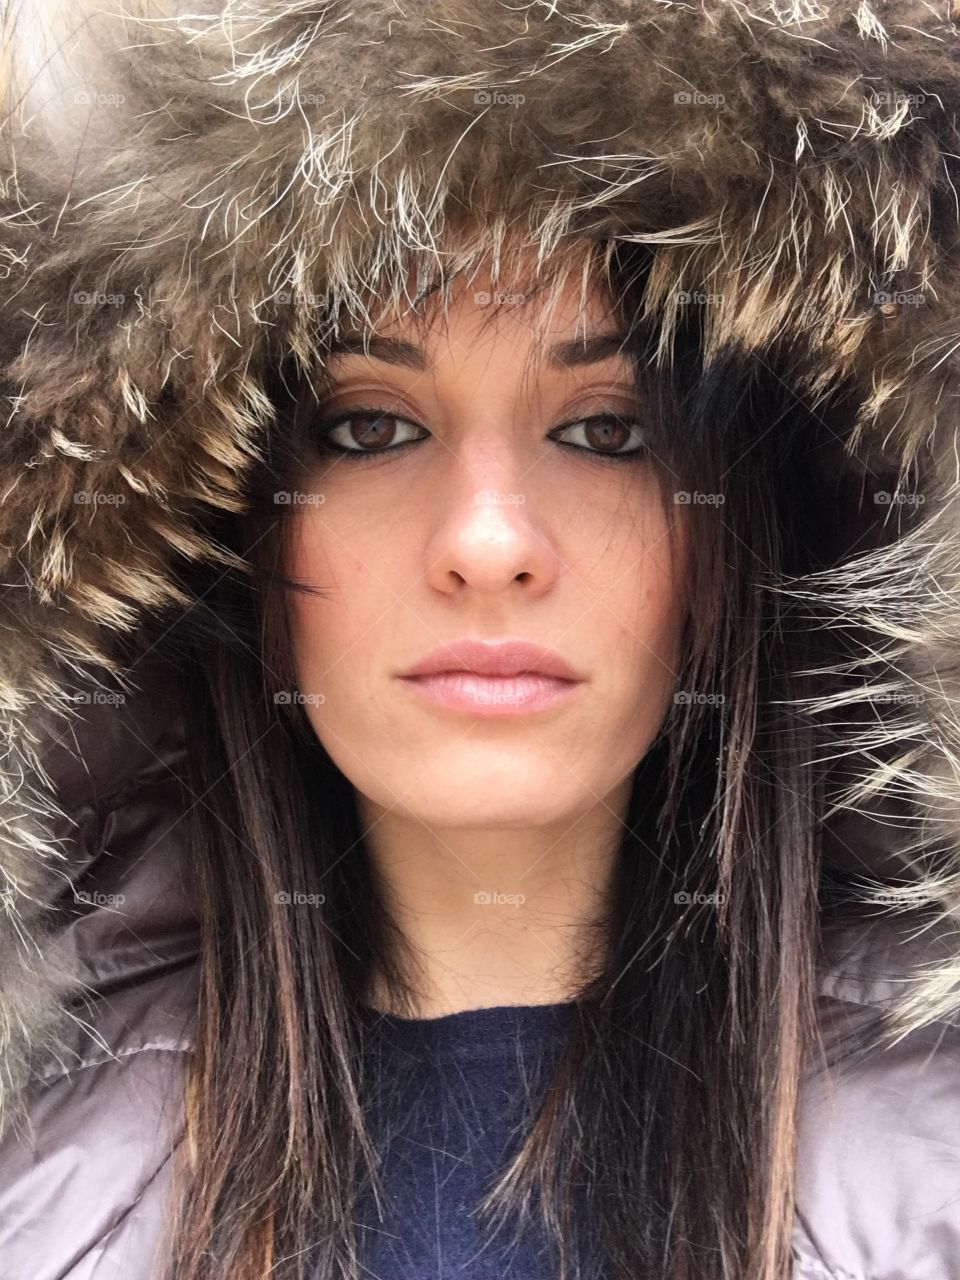 Getting serious here, girl outside on a cold winter day, no filter front camera 